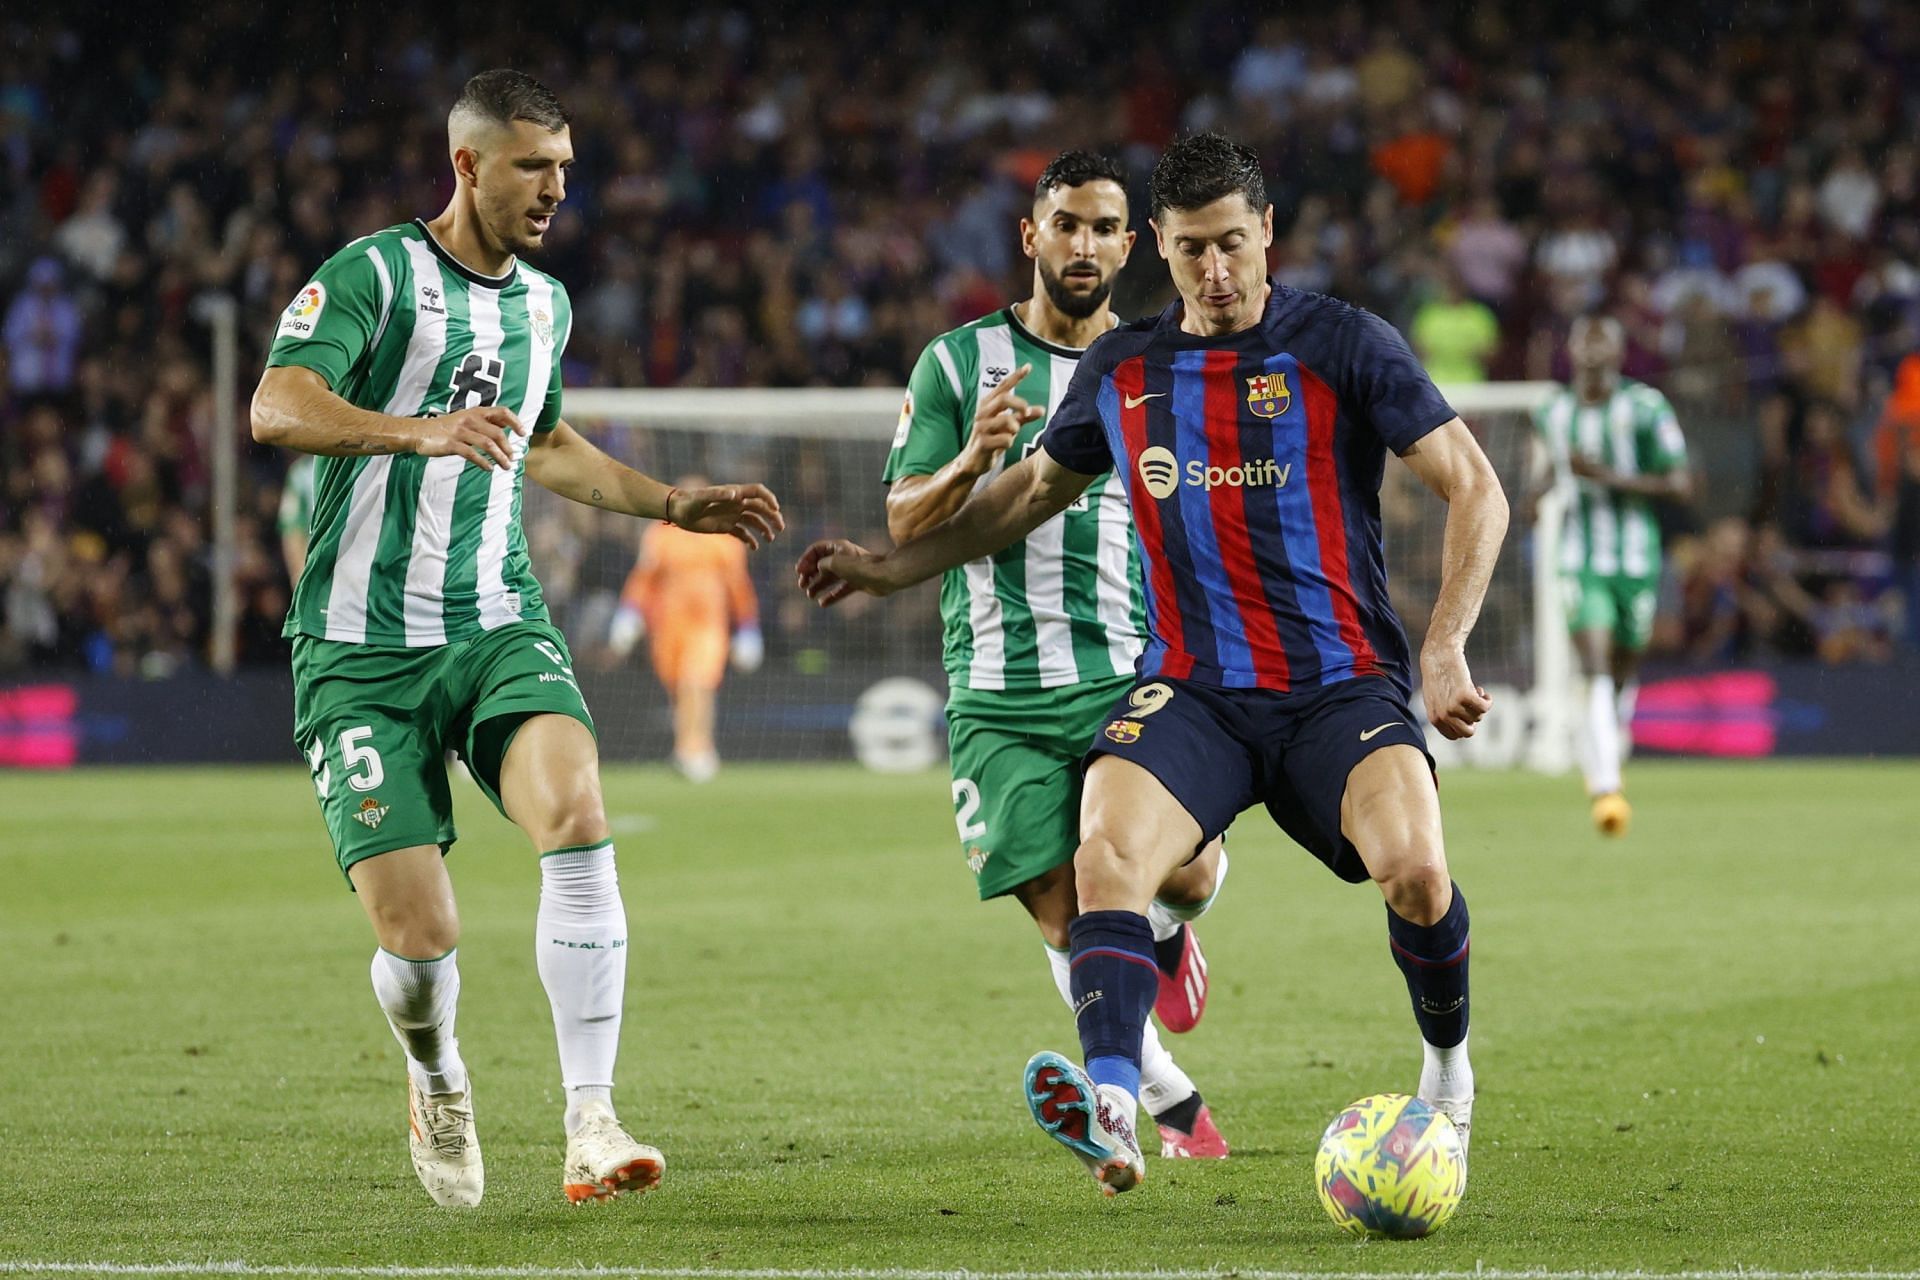 Barcelona have won their last six away games in La Liga to Betis 